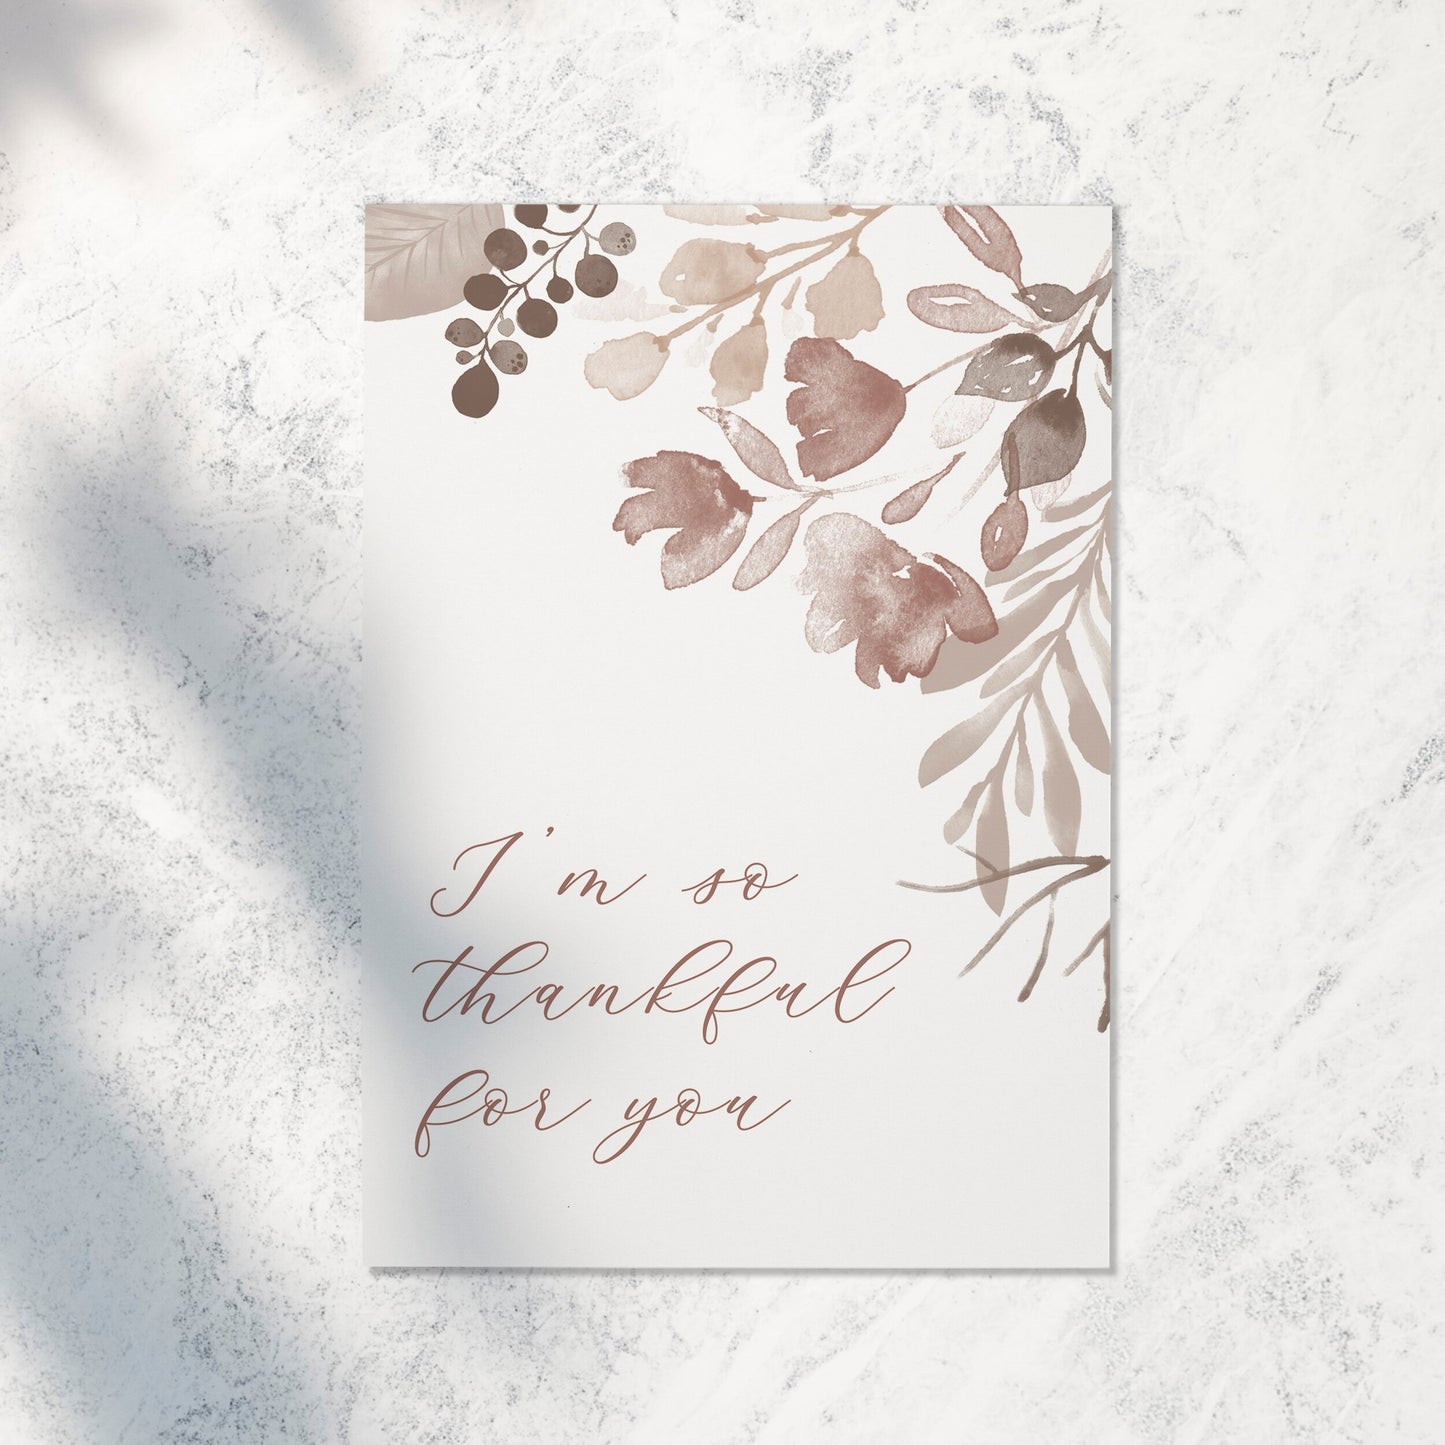 So Thankful for You | Greeting Card